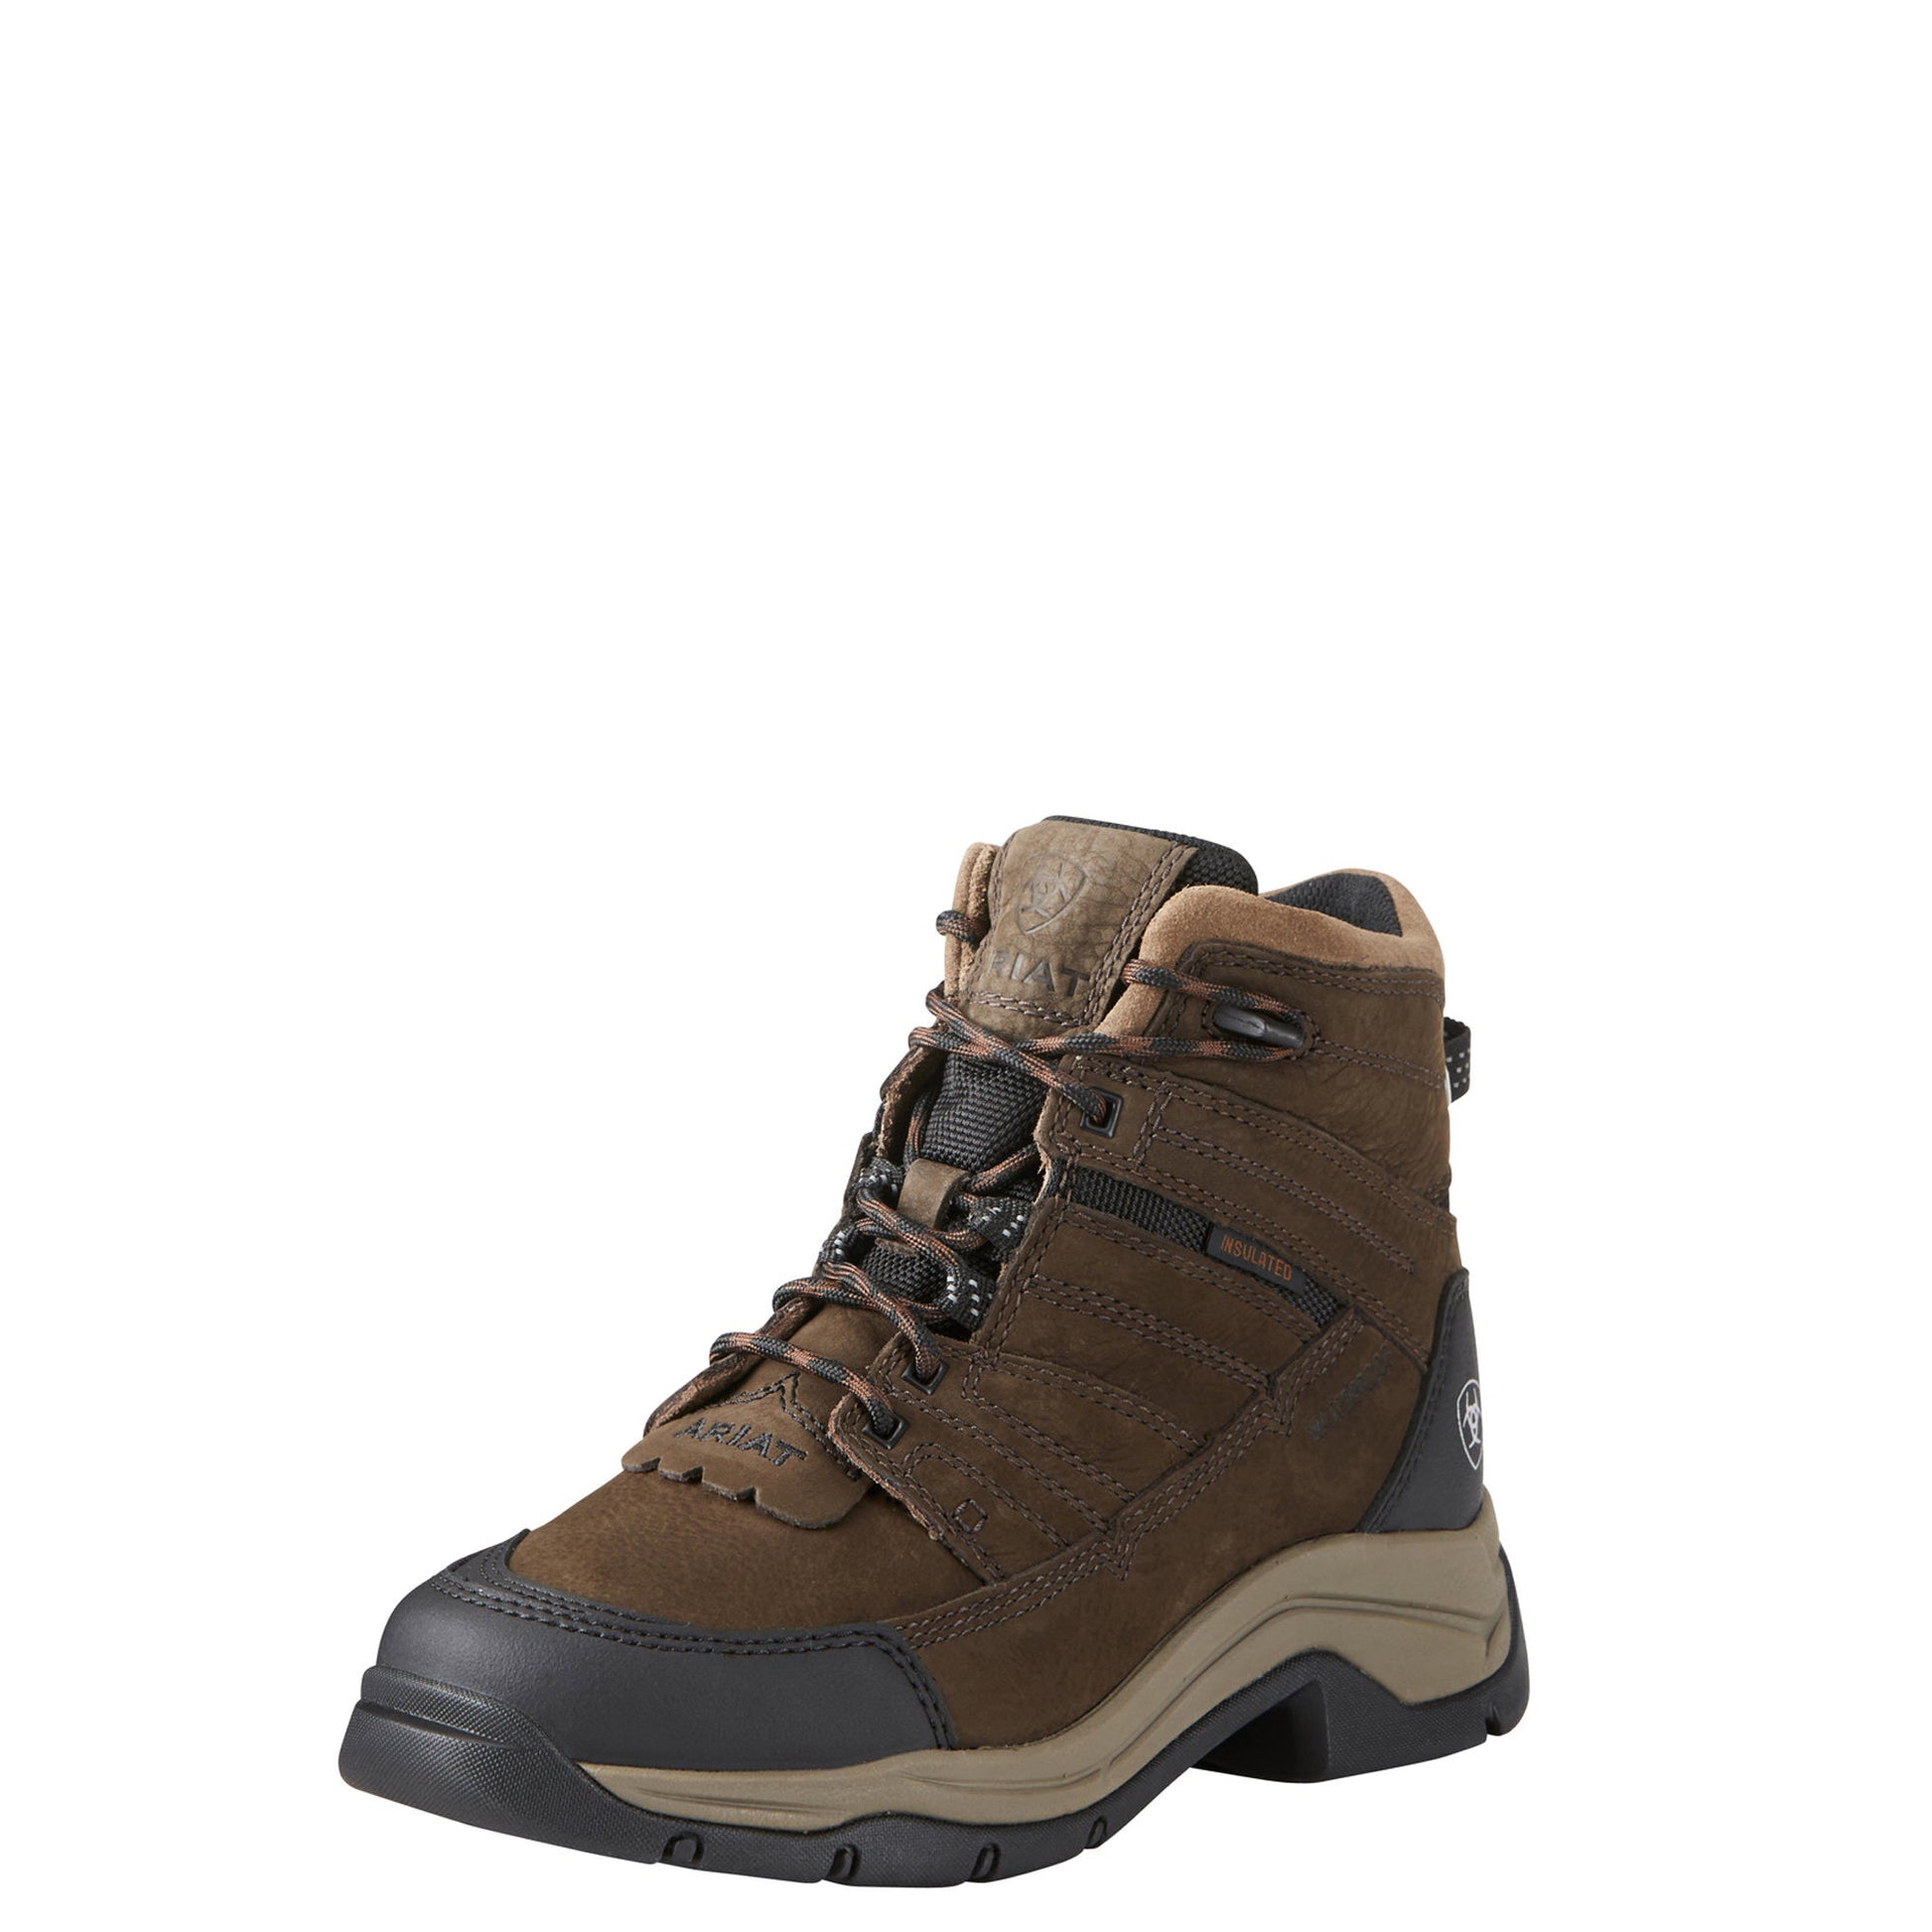 Ariat Women's Terrain Pro H2O Insulated Boot - Java - French's Boots